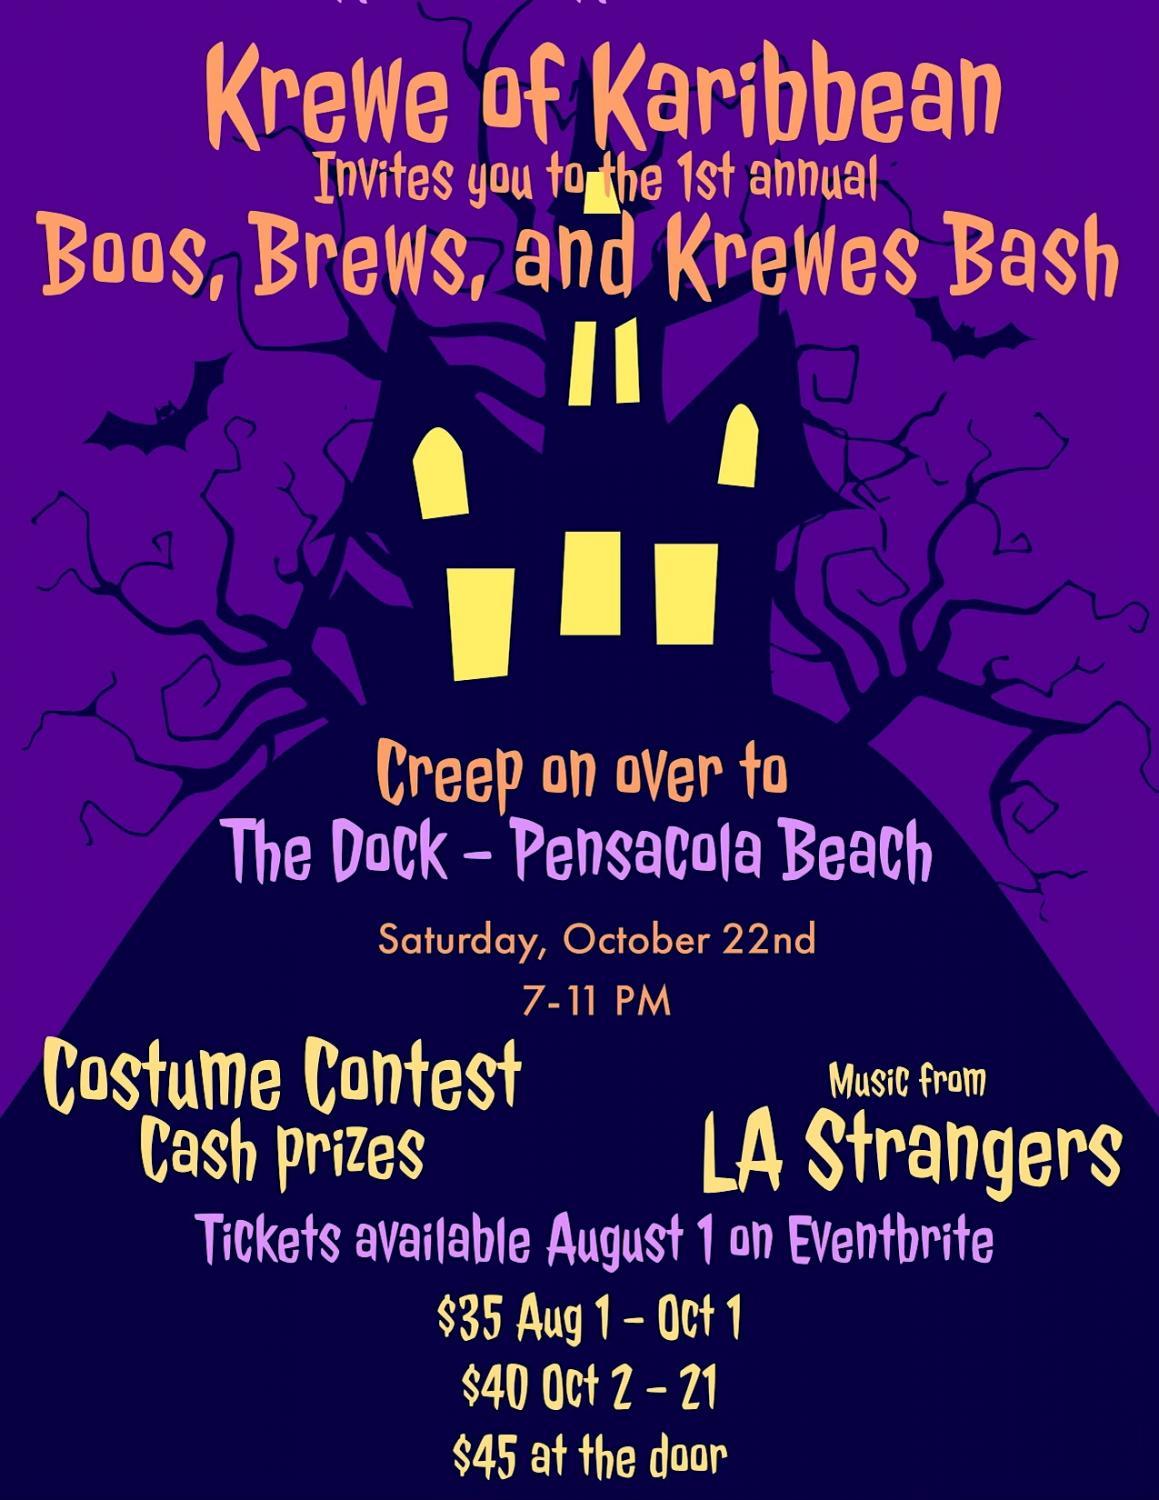 Krewe of Karibbean's First Annual Boos, Brews, and Krewes Bash
Sat Oct 22, 7:00 PM - Sat Oct 22, 11:00 PM
in 2 days